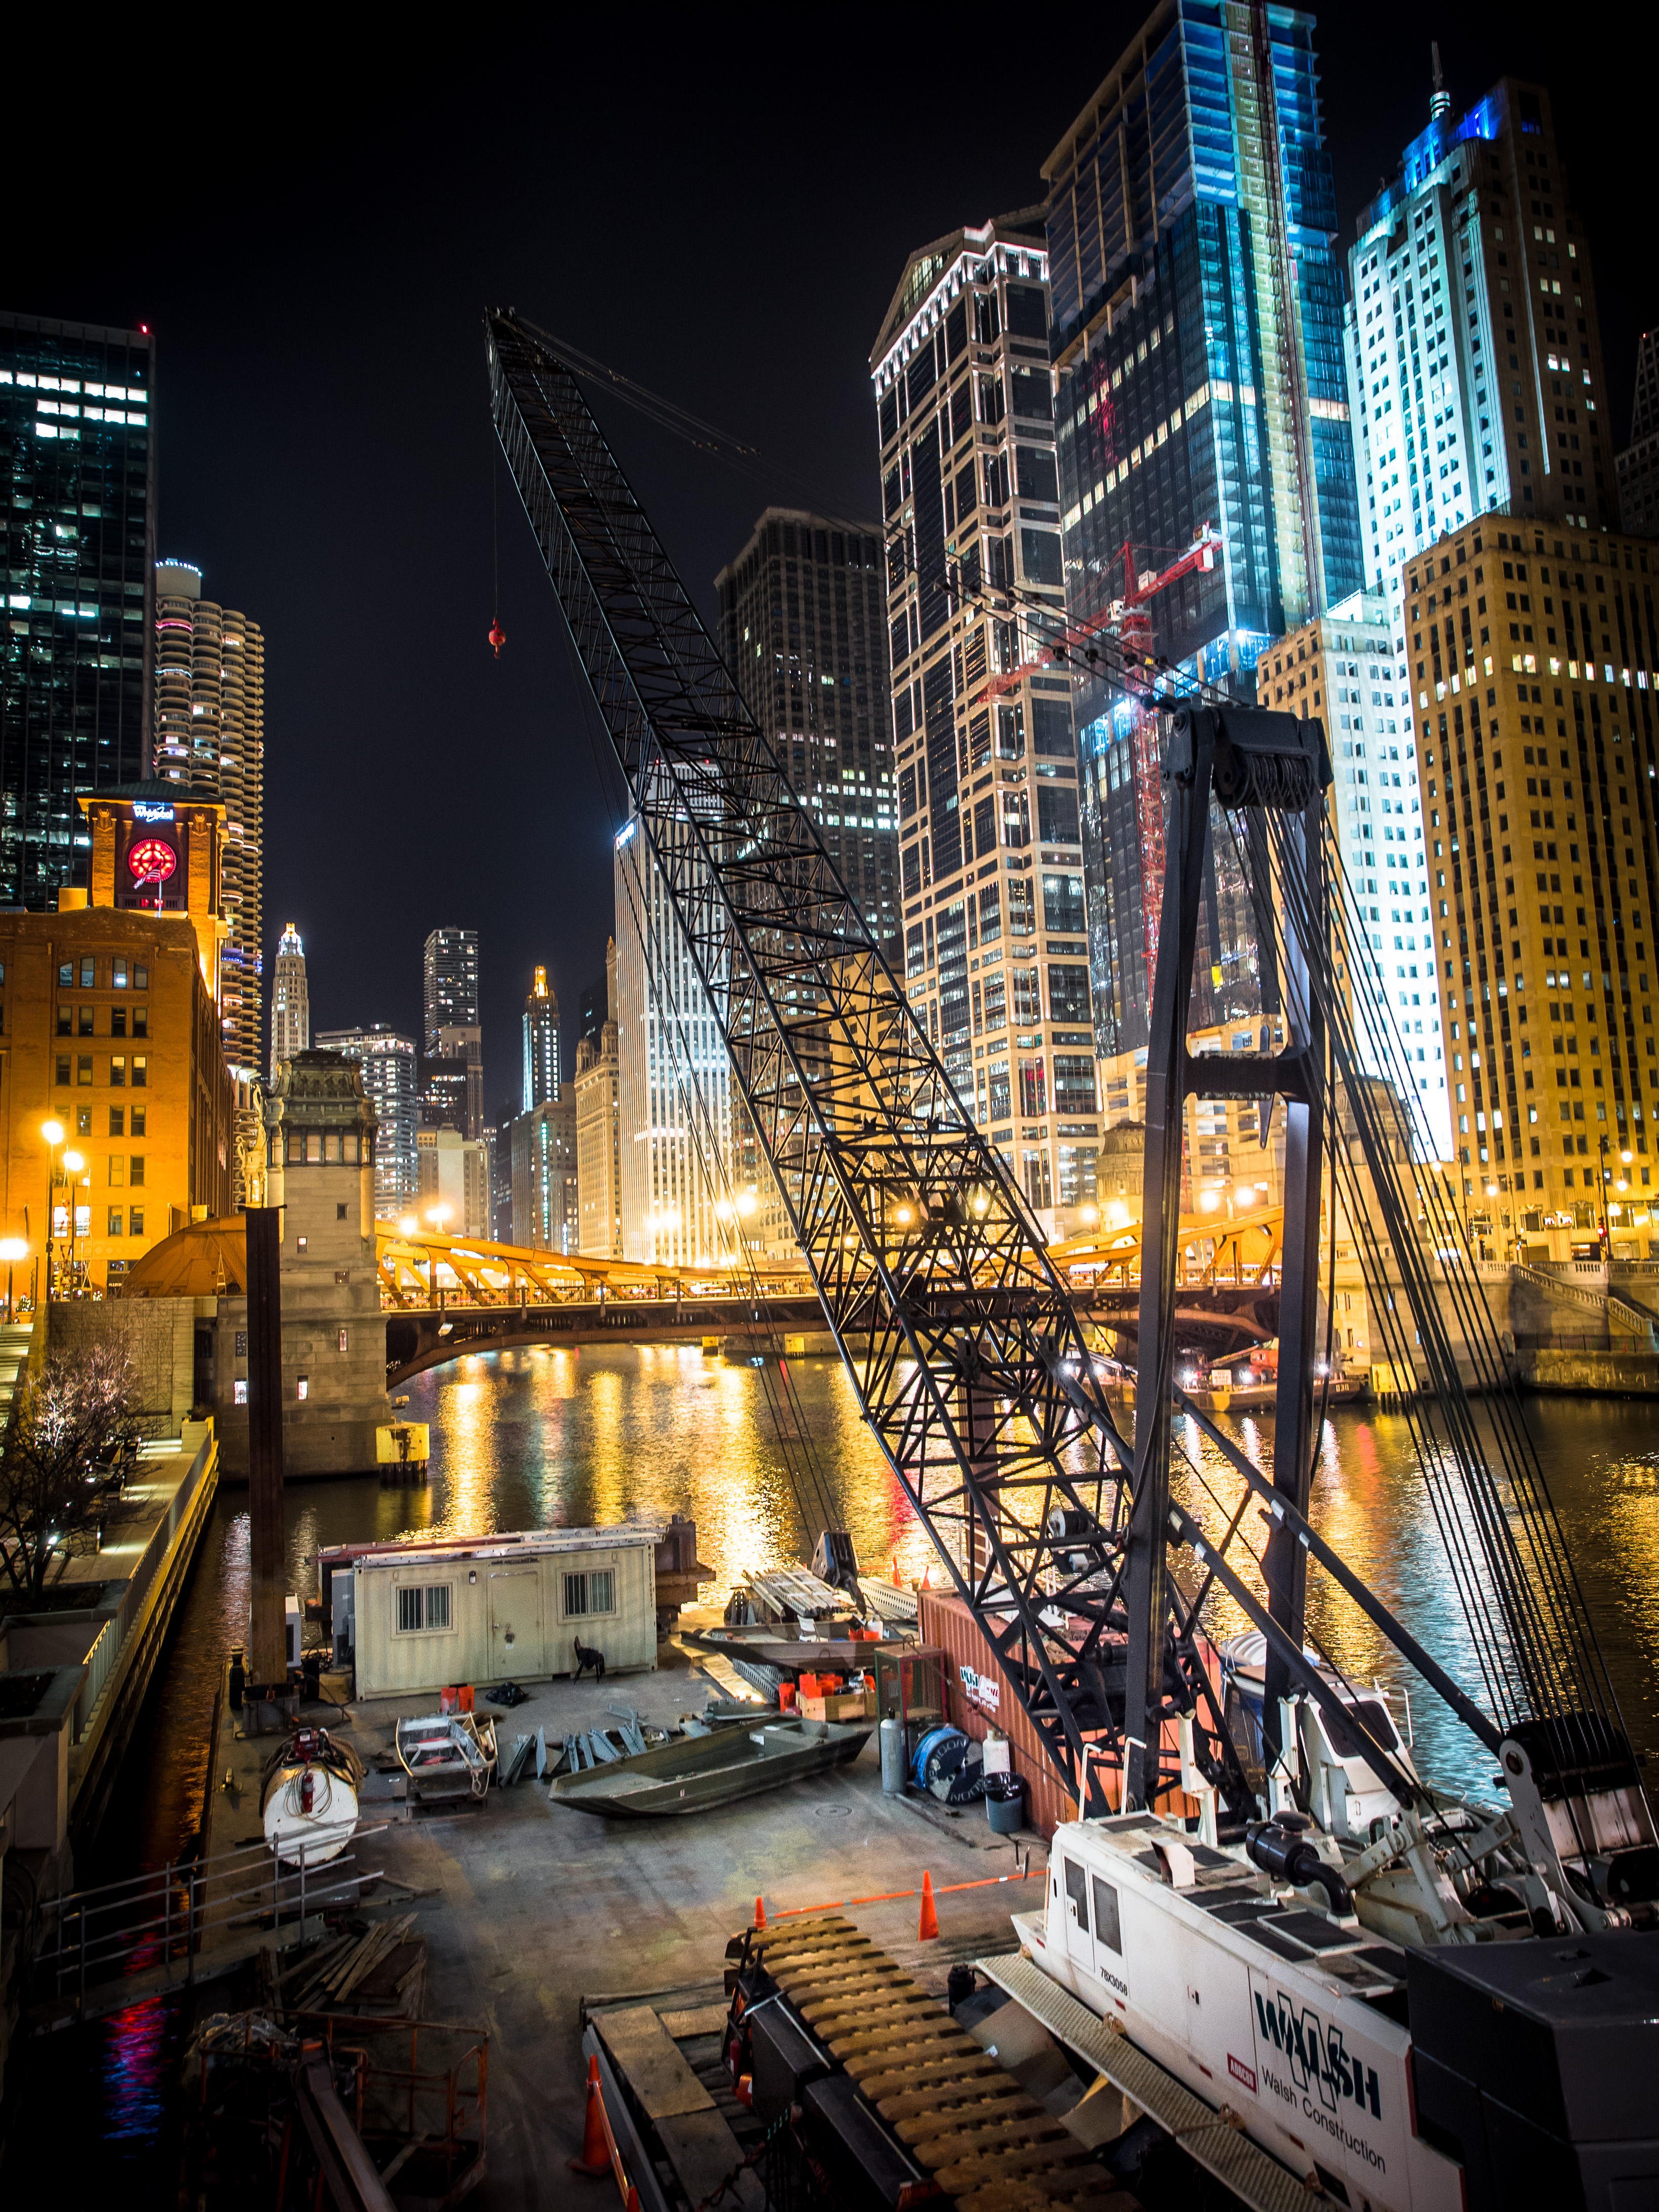 Construction Barge on the Chicago River